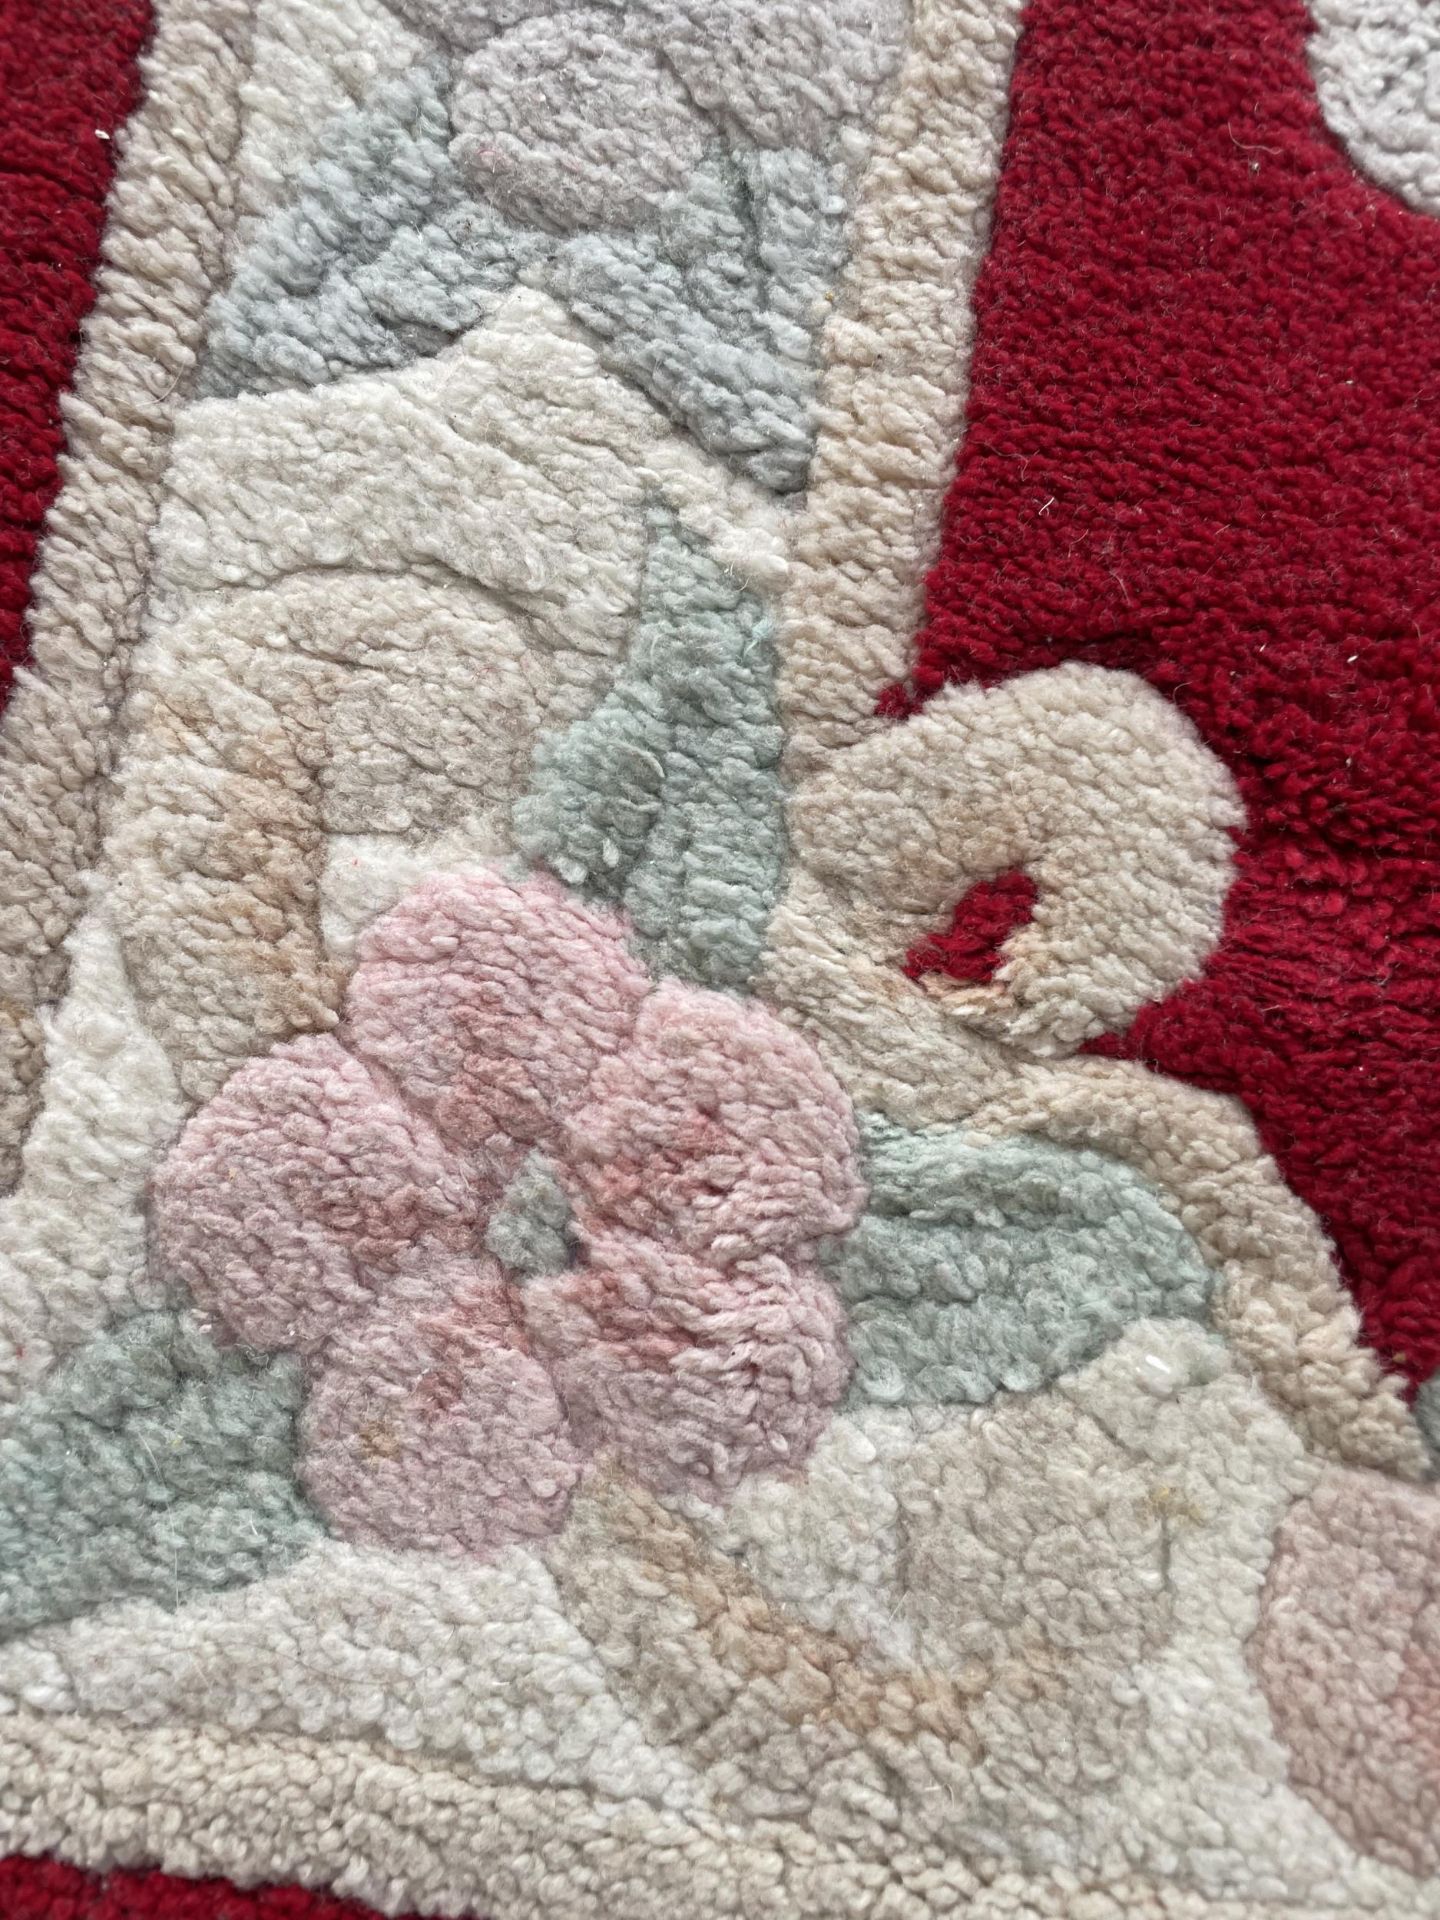 A SMALL RED PATTERNED RUG - Image 2 of 2